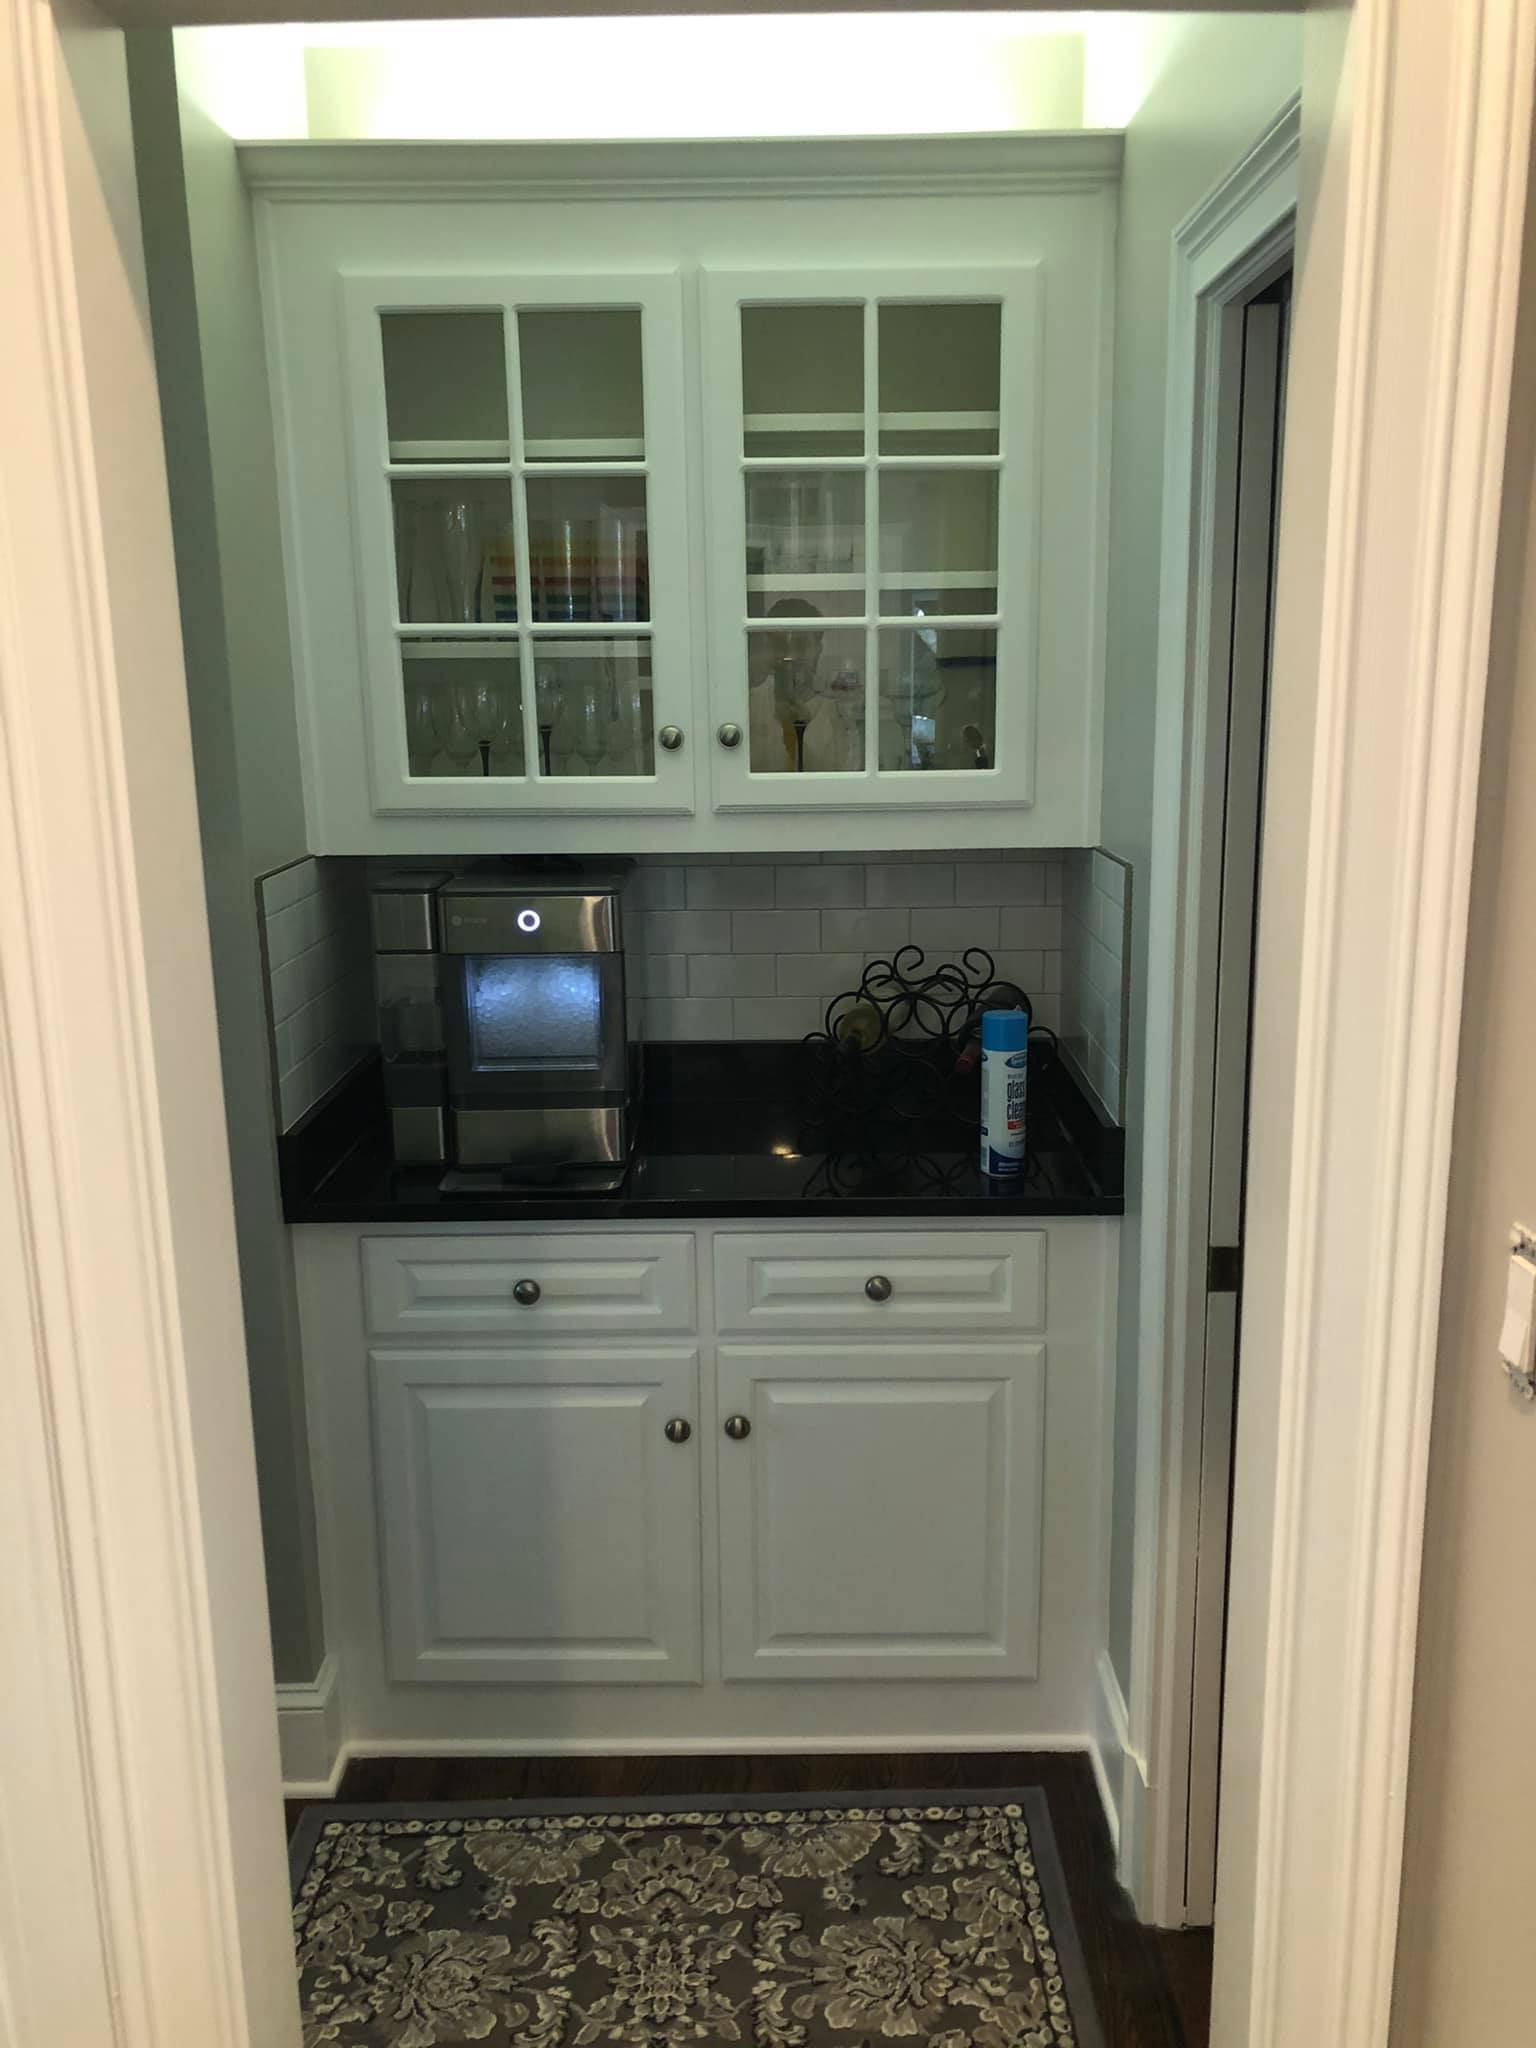 Full Kitchen Cabinets Resurfacing Painting  Refinishing Near Peachtree City 3 ?is Pending Load=1